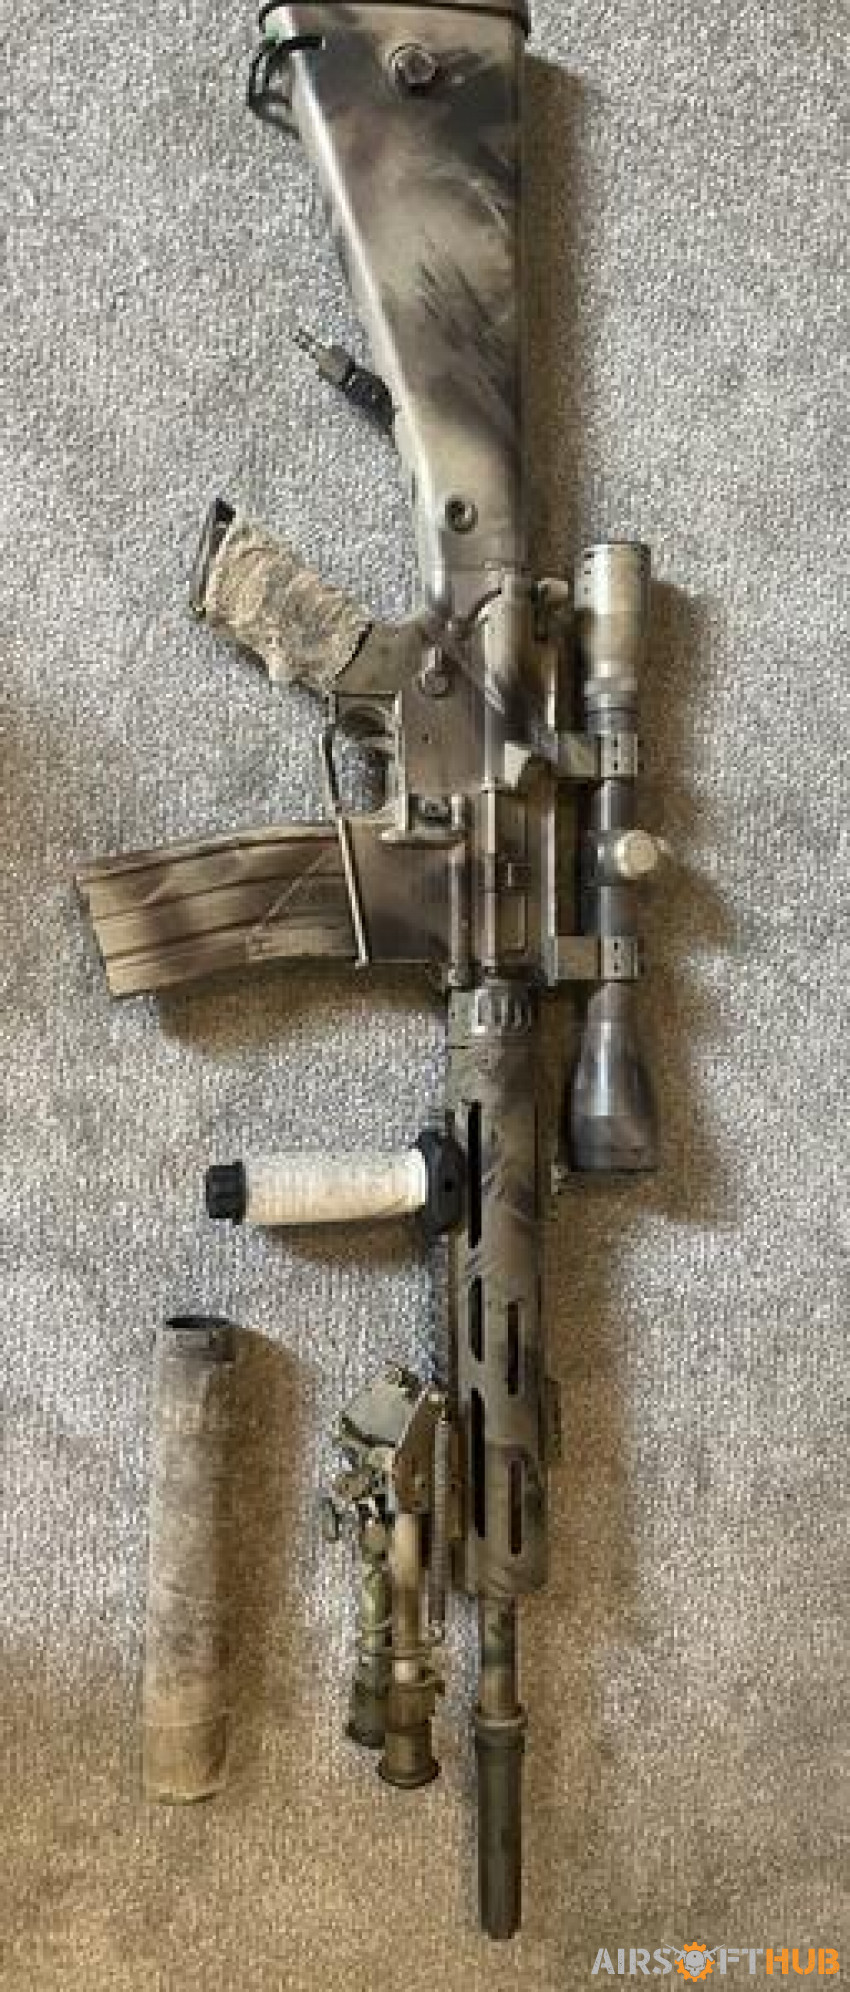 Hpa dmr krytac - Used airsoft equipment